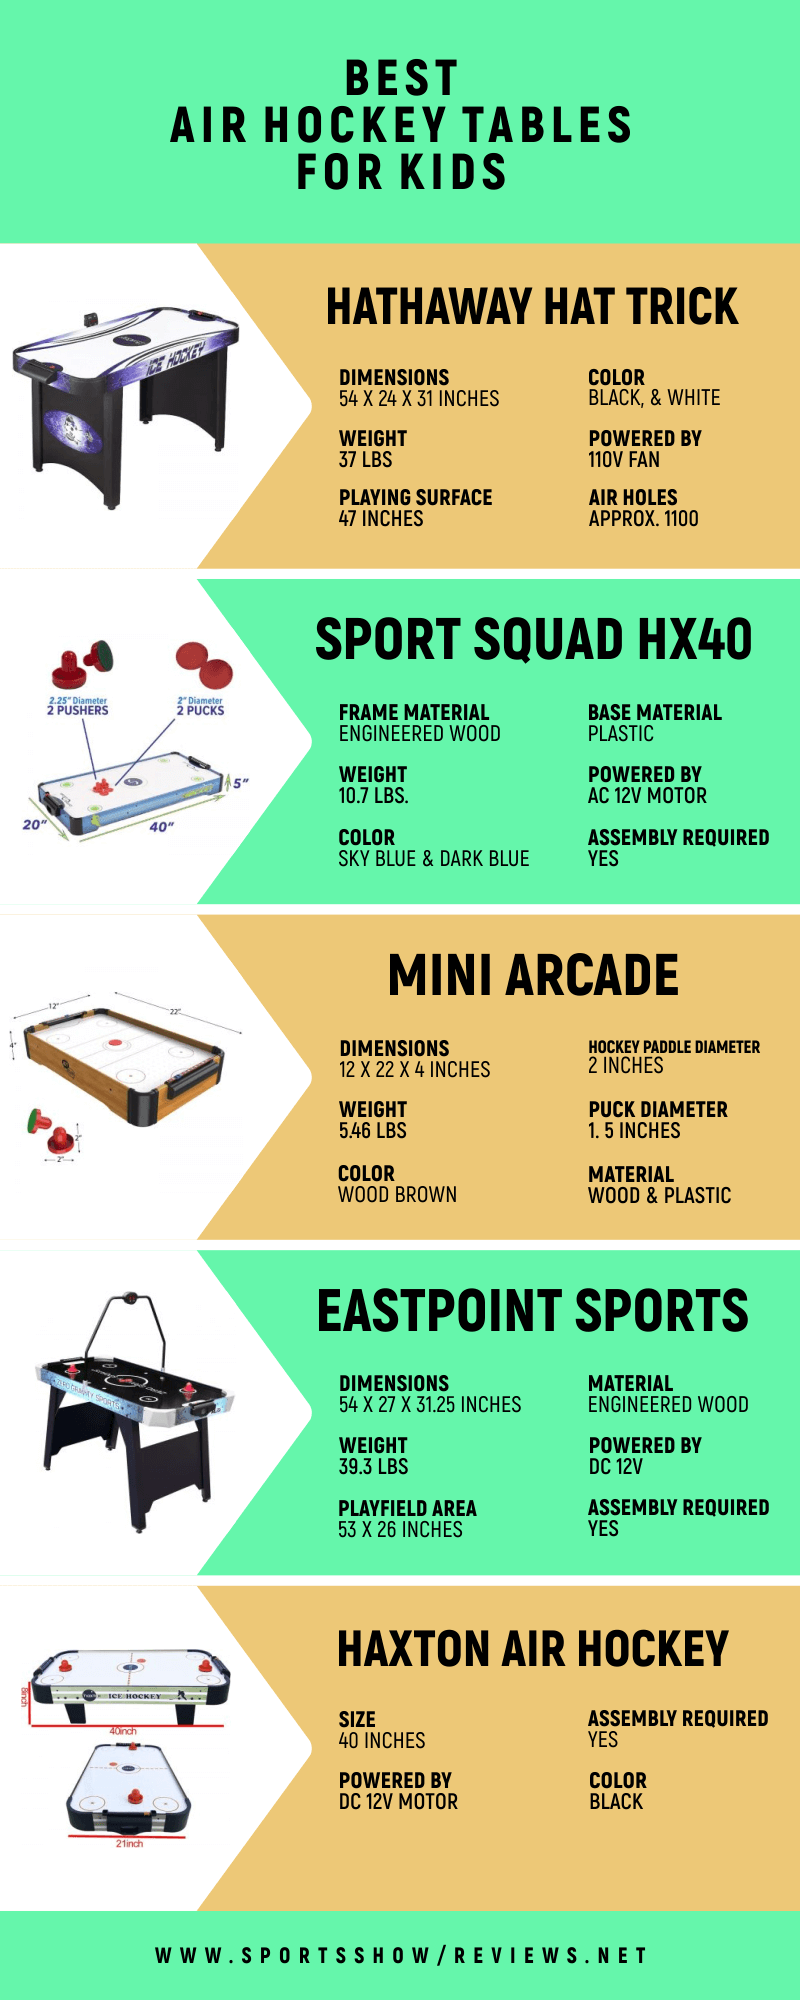 Best Air Hockey Tables For Kids - Infographic